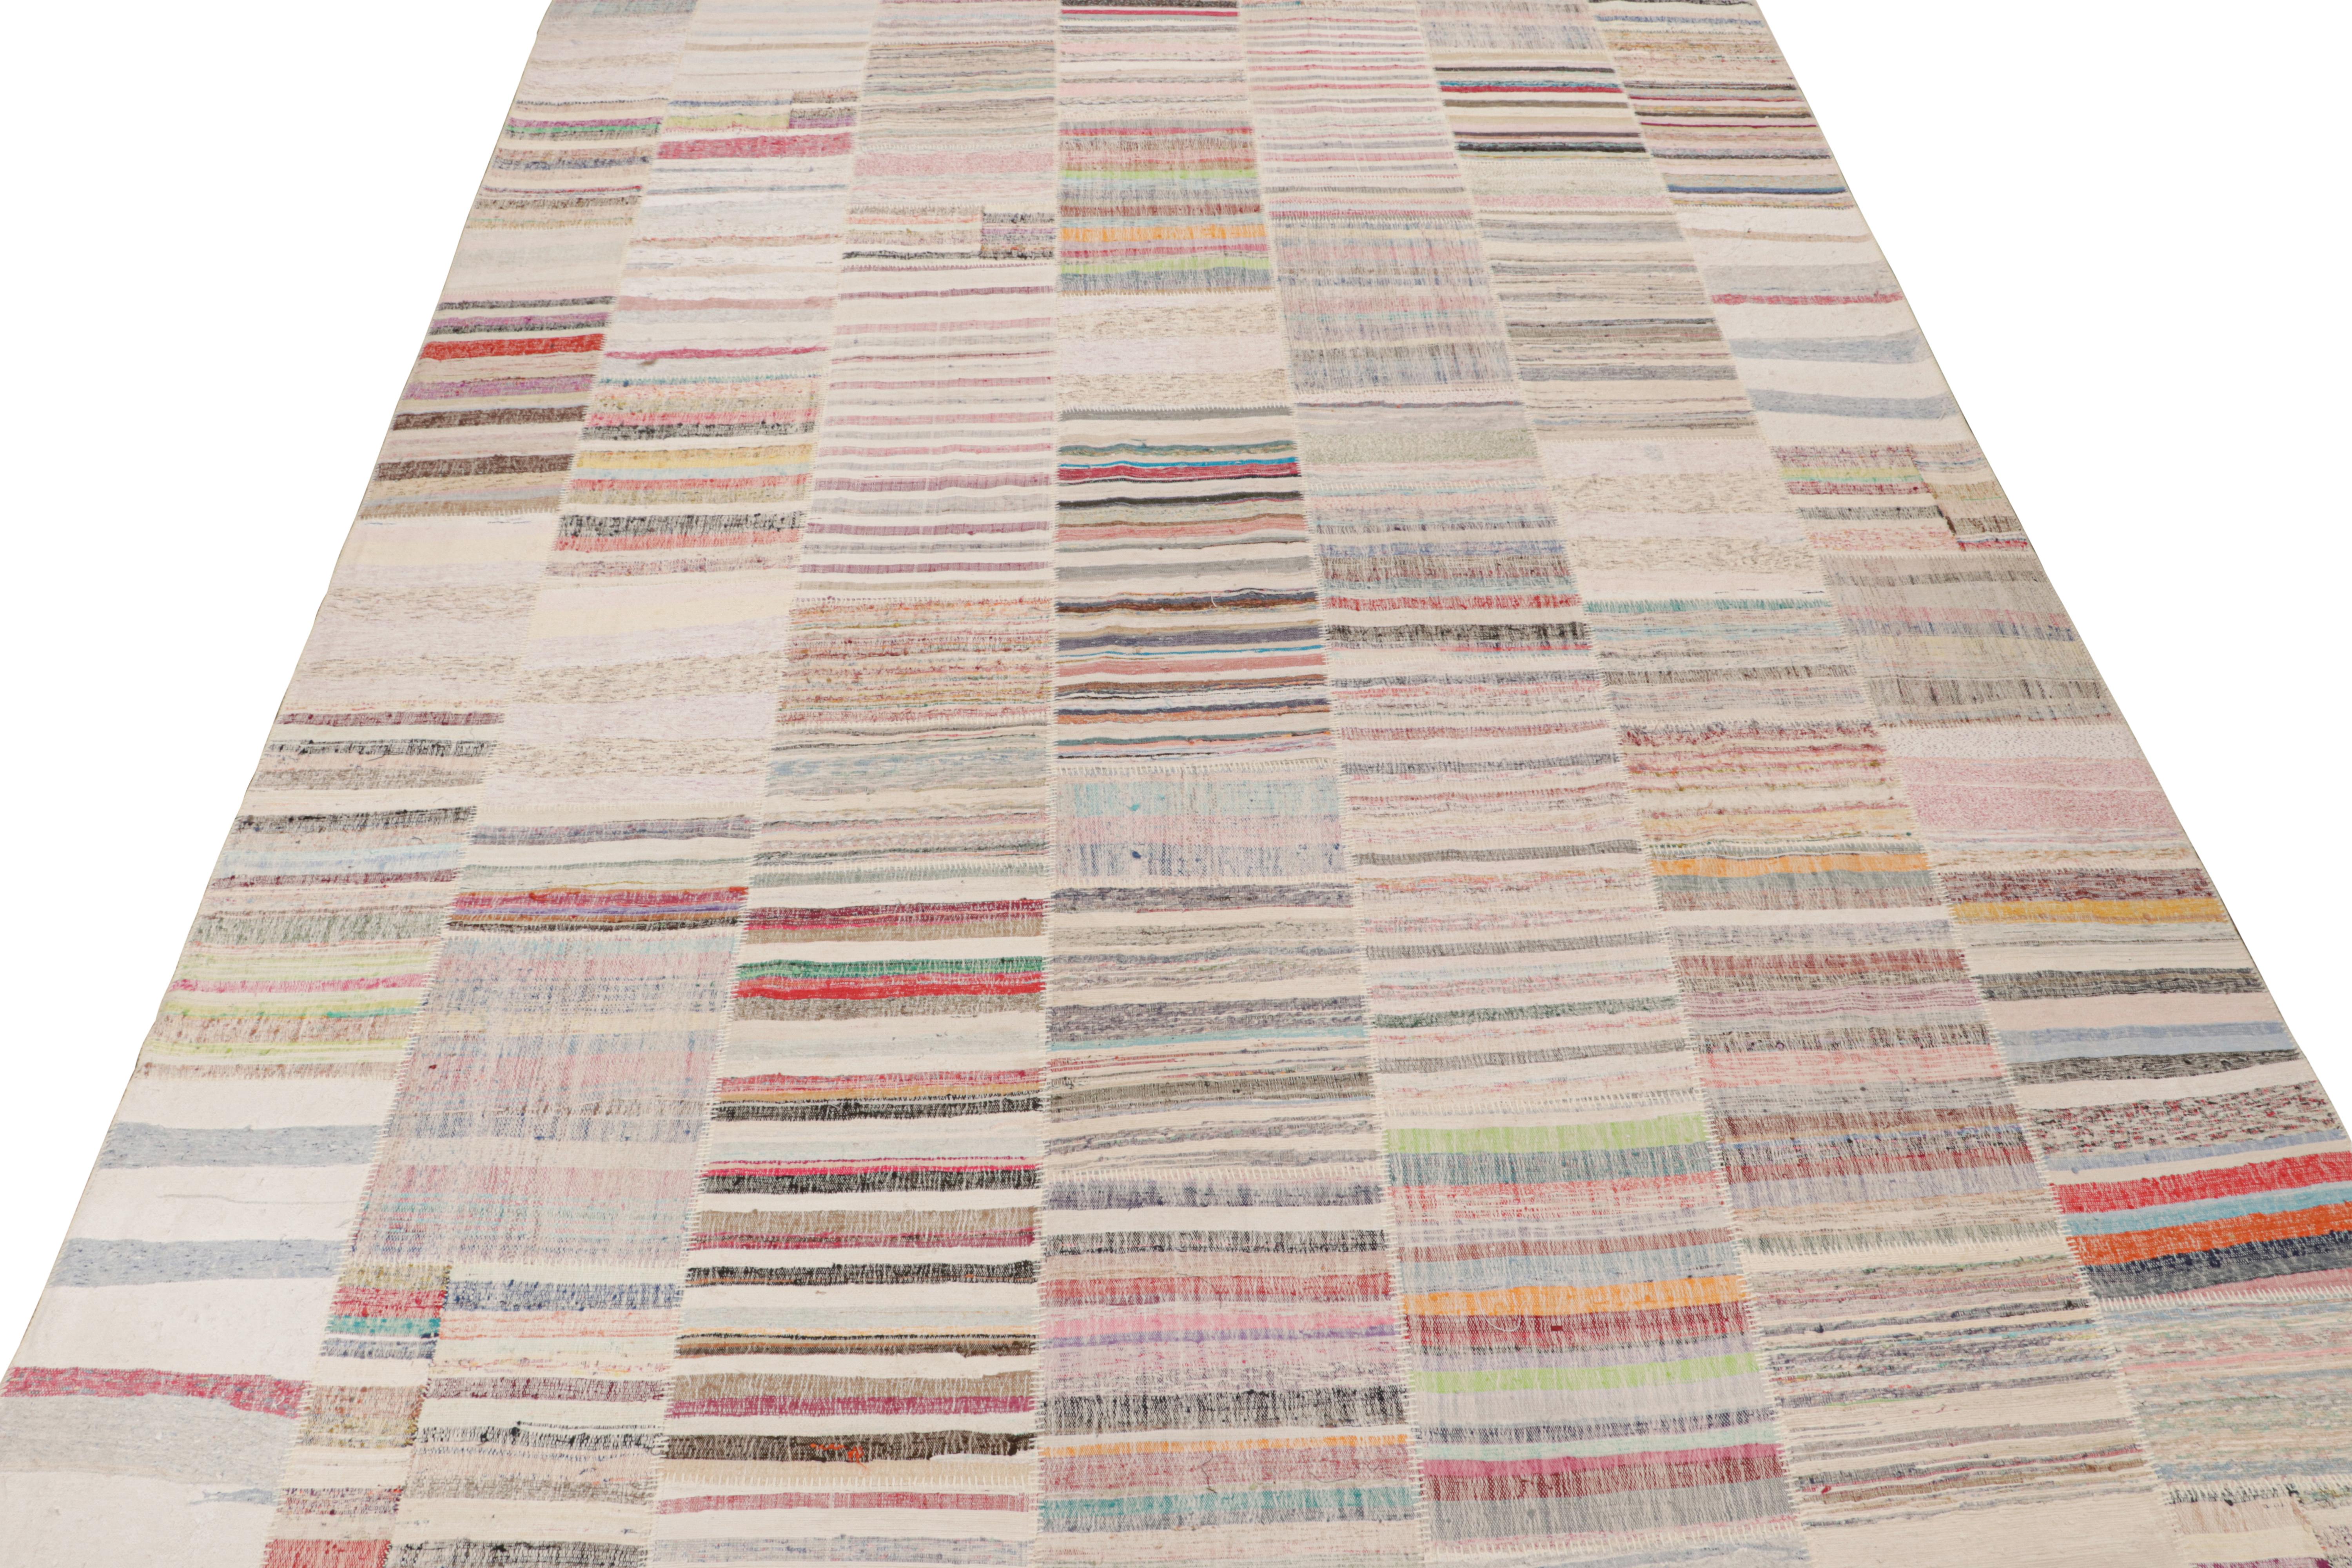 Rug & Kilim presents a contemporary 13x19 rug from their innovative new patchwork Kilim collection.

Further On the Design:

This flat weave technique repurposes vintage yarns in polychromatic stripes and striae, achieving a playful look with